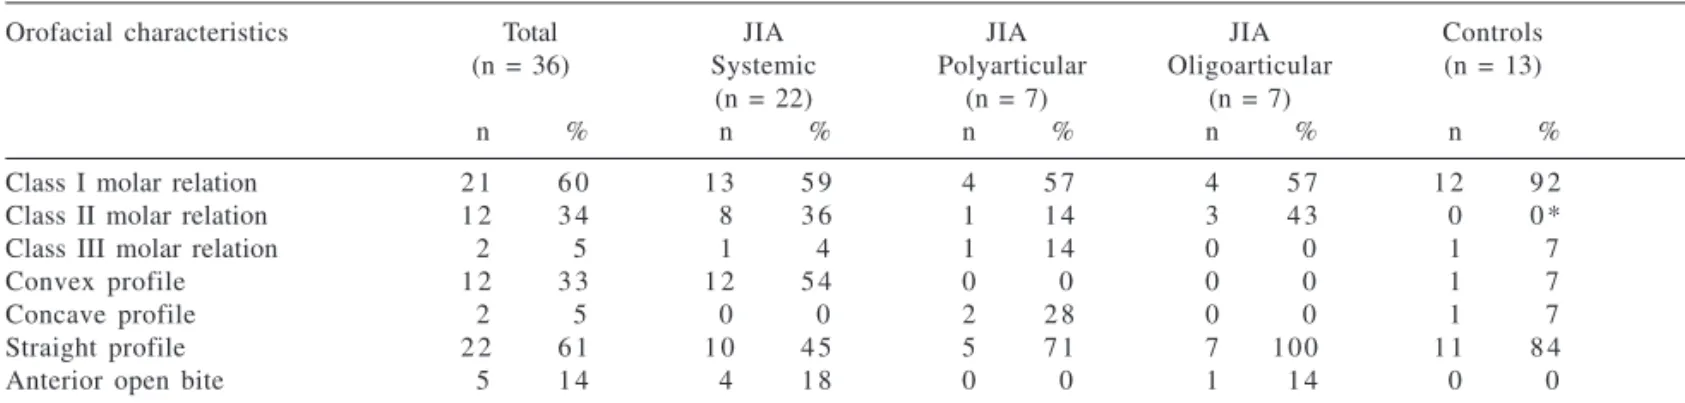 Table 1 - Clinical characteristics of 36 patients with juvenile idiopathic arthritis.